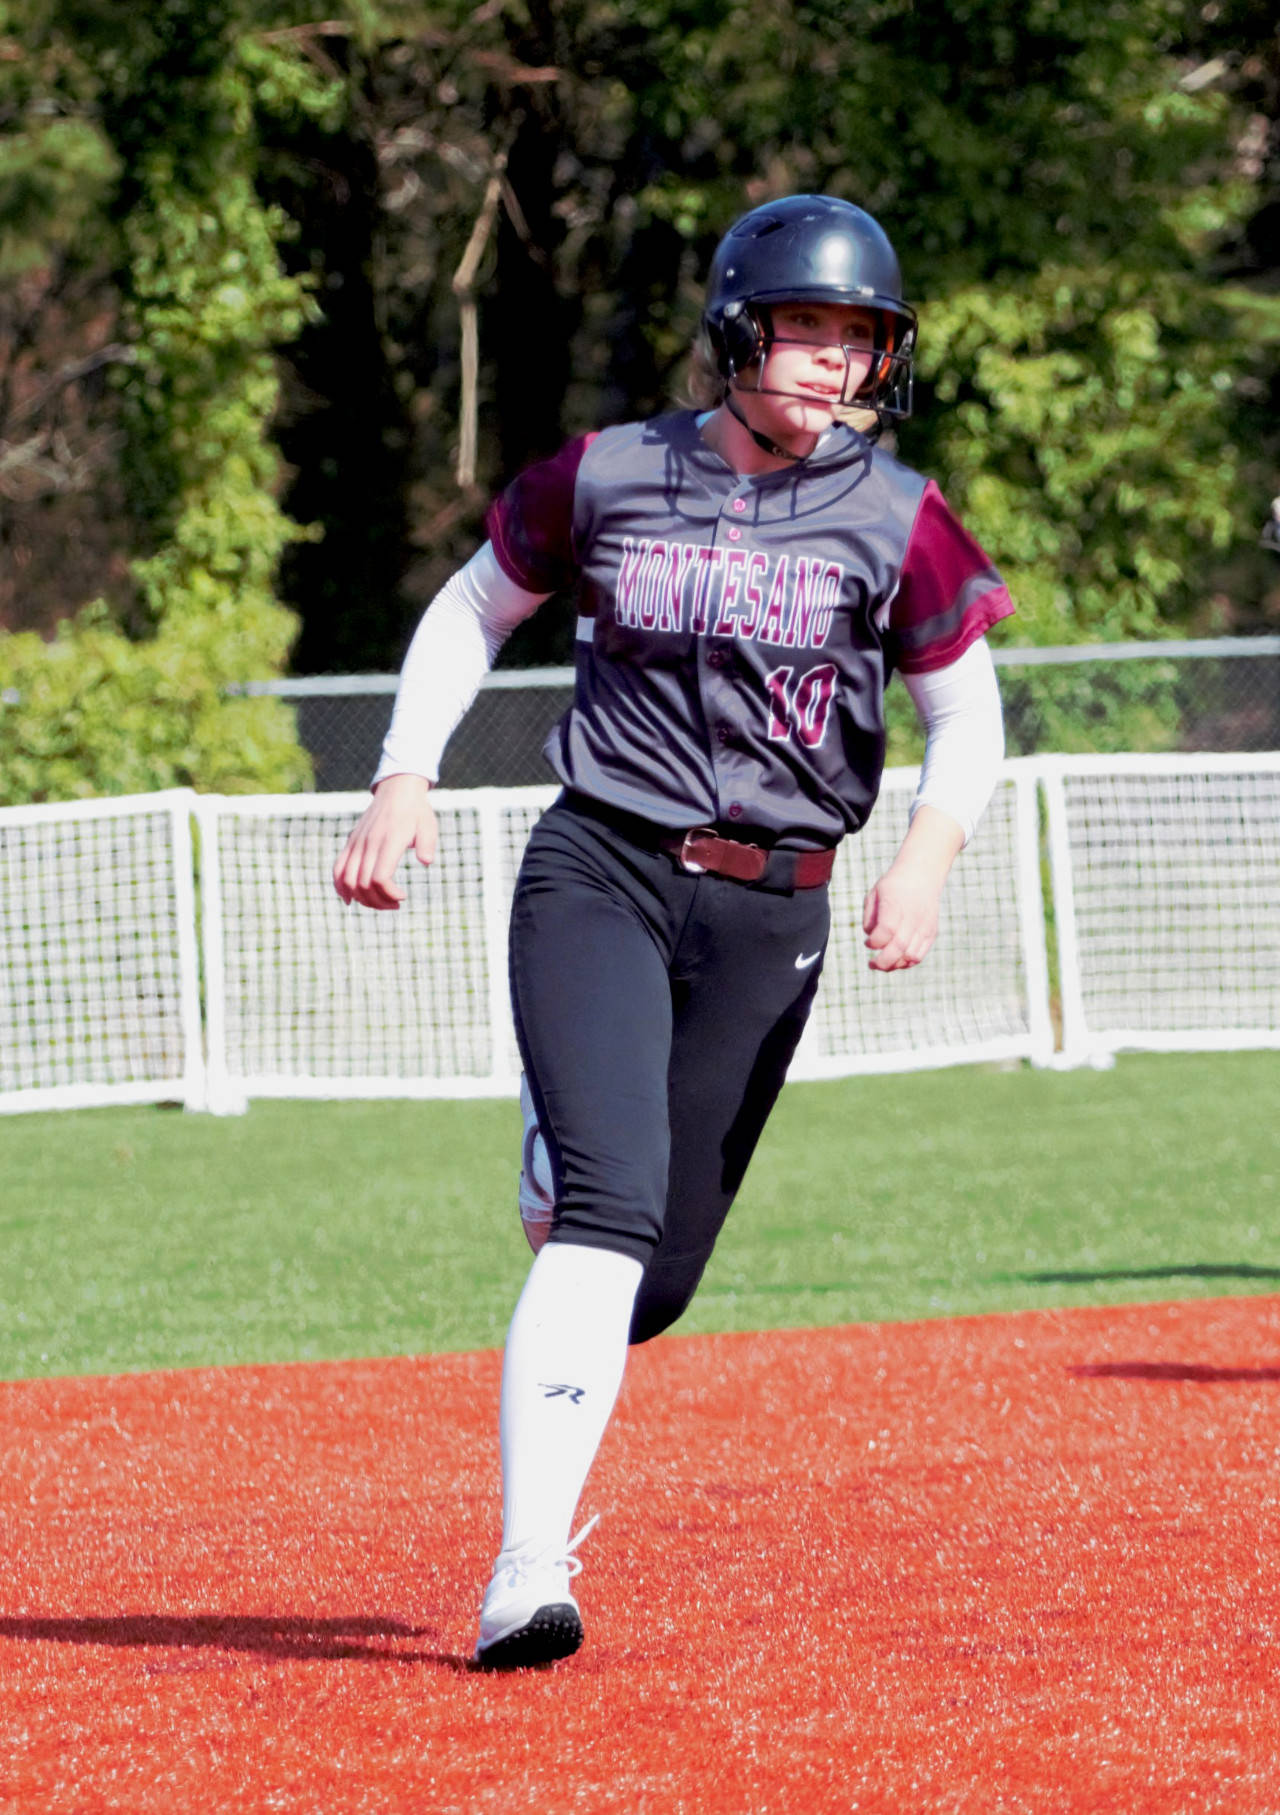 DAILY WORLD FILE PHOTO Montesano third basemen Jessica Stanfield broke a school record with her ninth home run of the season against Hoquiam on Friday.